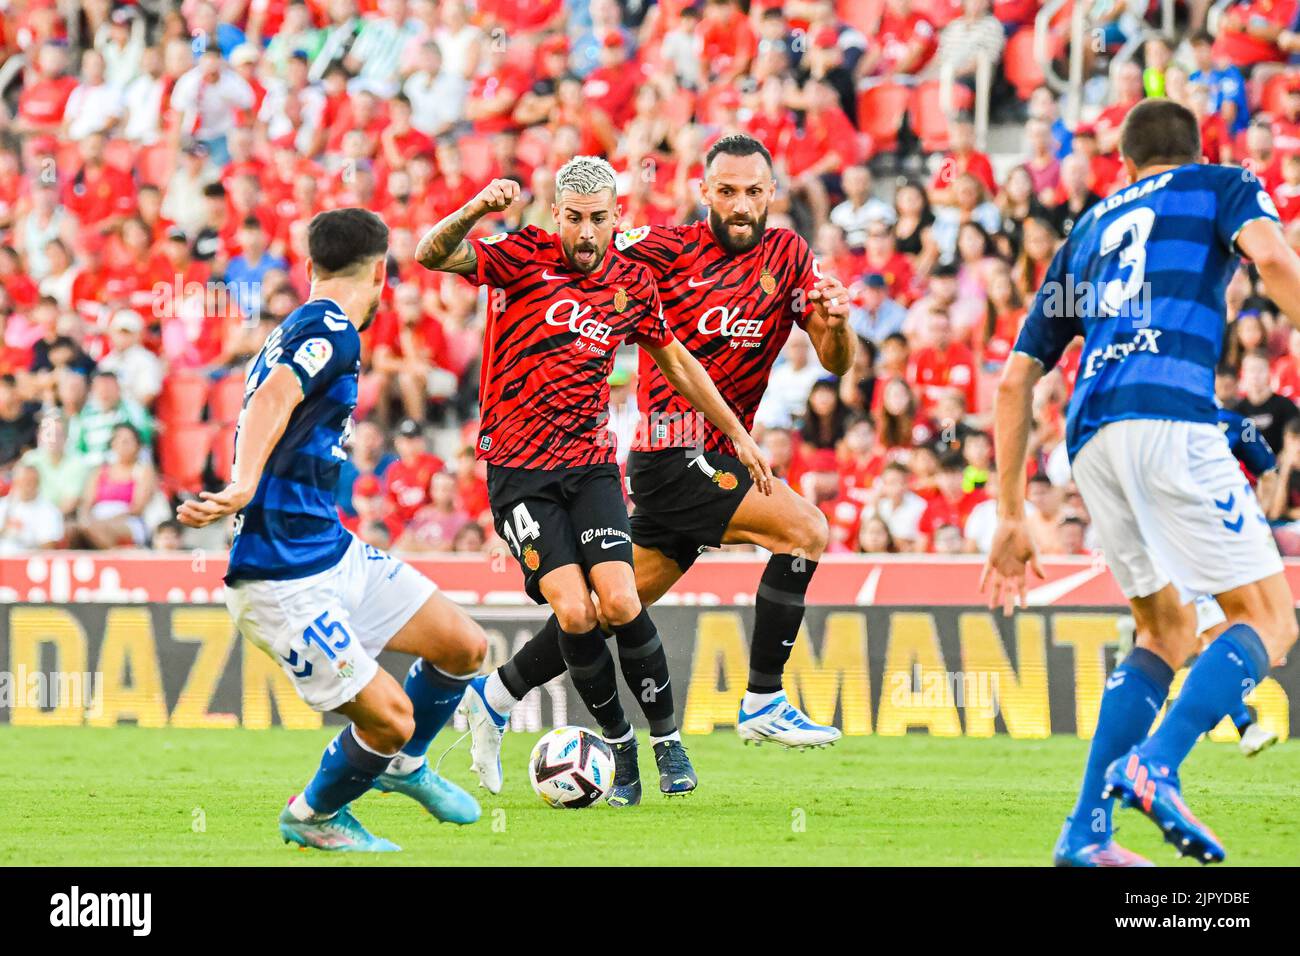 MALLORCA, SPAIN - AUGUST 20: Dani Rodriguez  of RCD Mallorca in the match between RCD Mallorca and Real Betis of La Liga Santander on August 20, 2022 at Visit Mallorca Stadium Son Moix in Mallorca, Spain. (Photo by Samuel Carreño/PxImages) Stock Photo